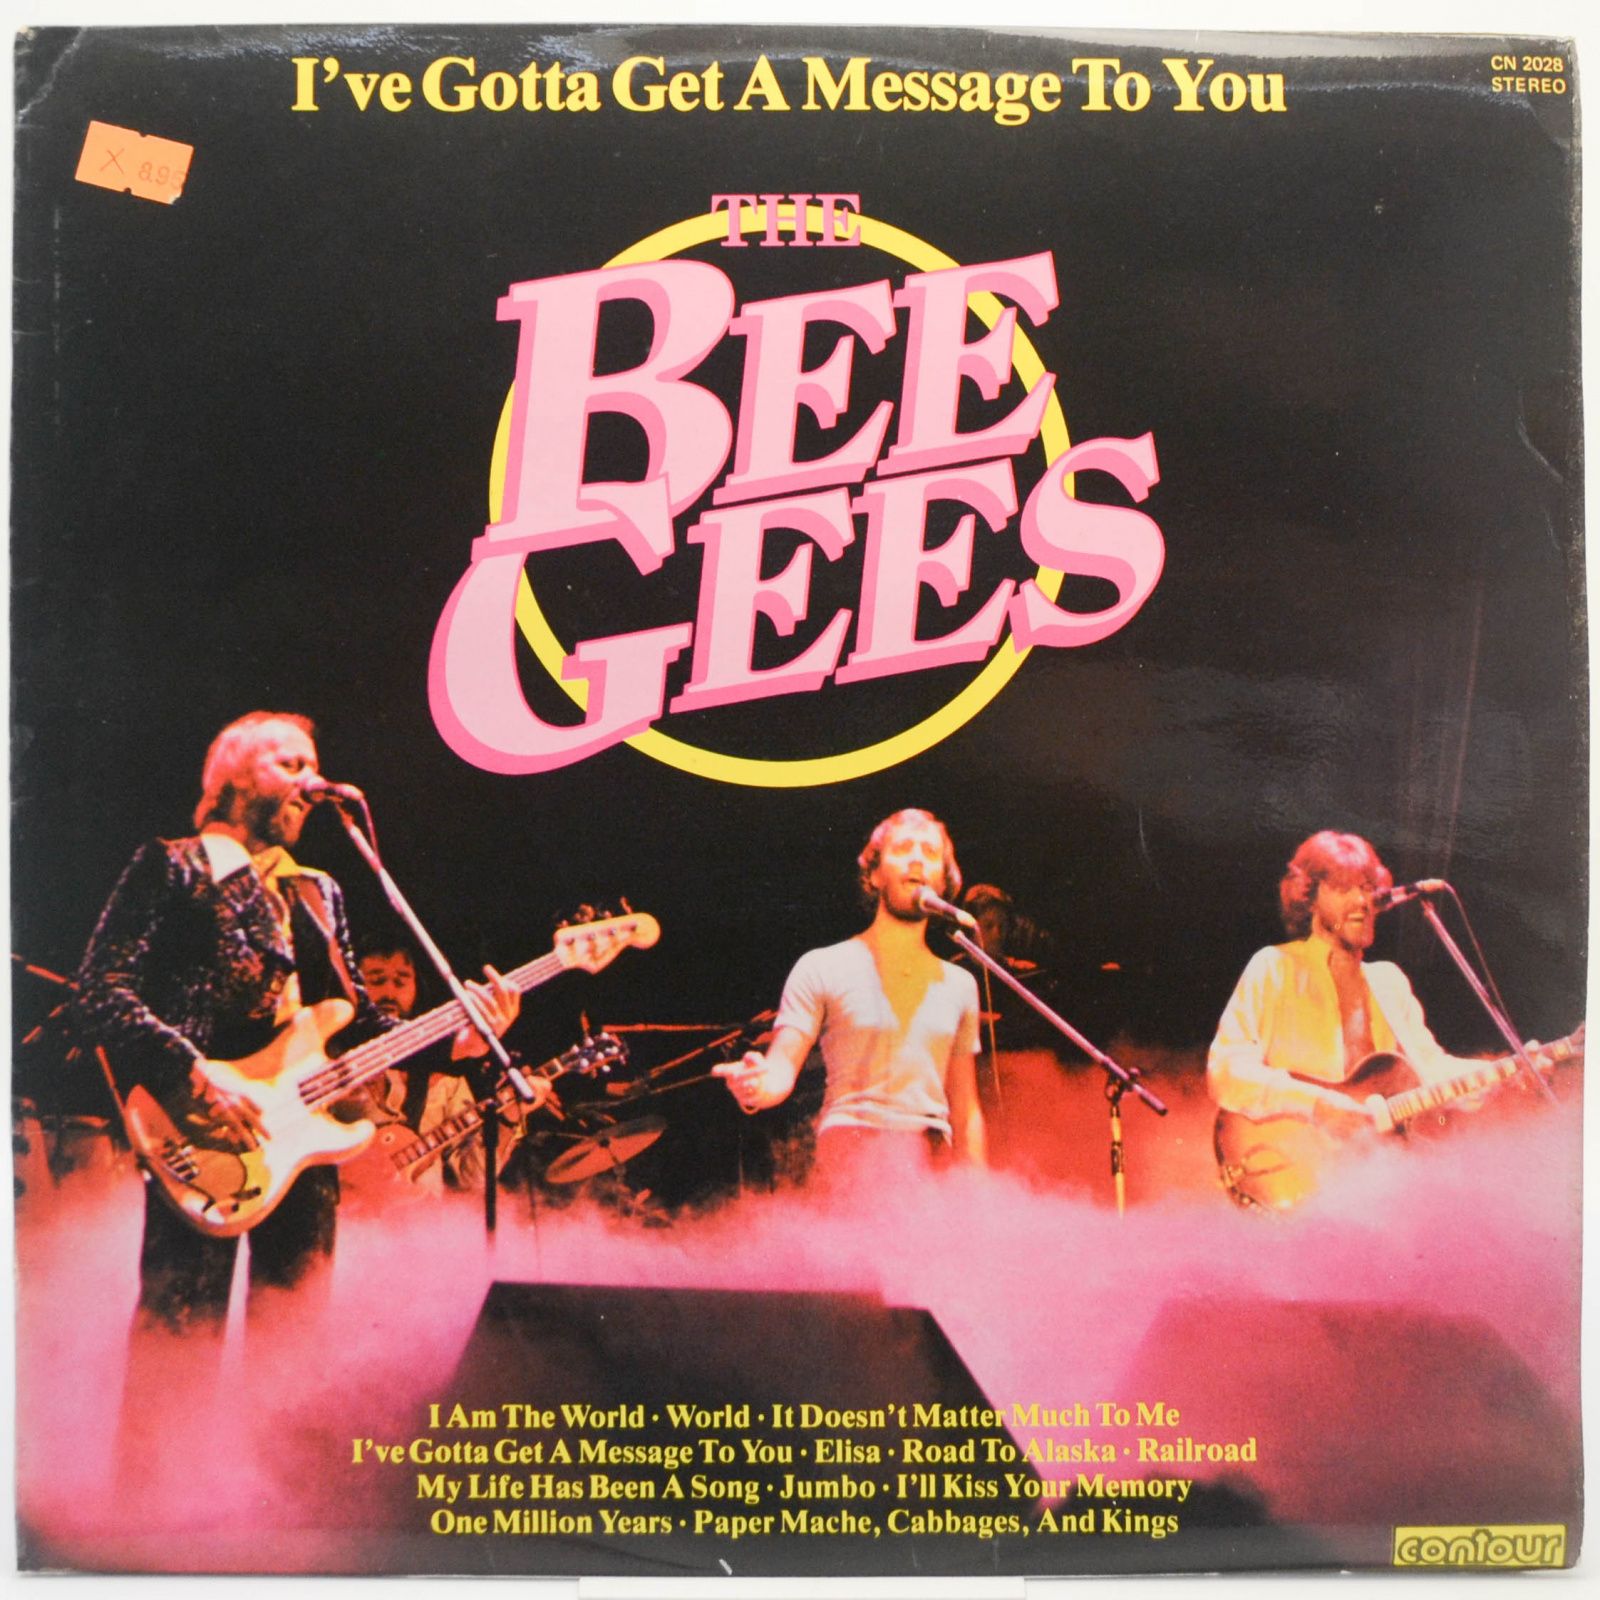 Bee Gees — I've Gotta Get A Message To You, 1978